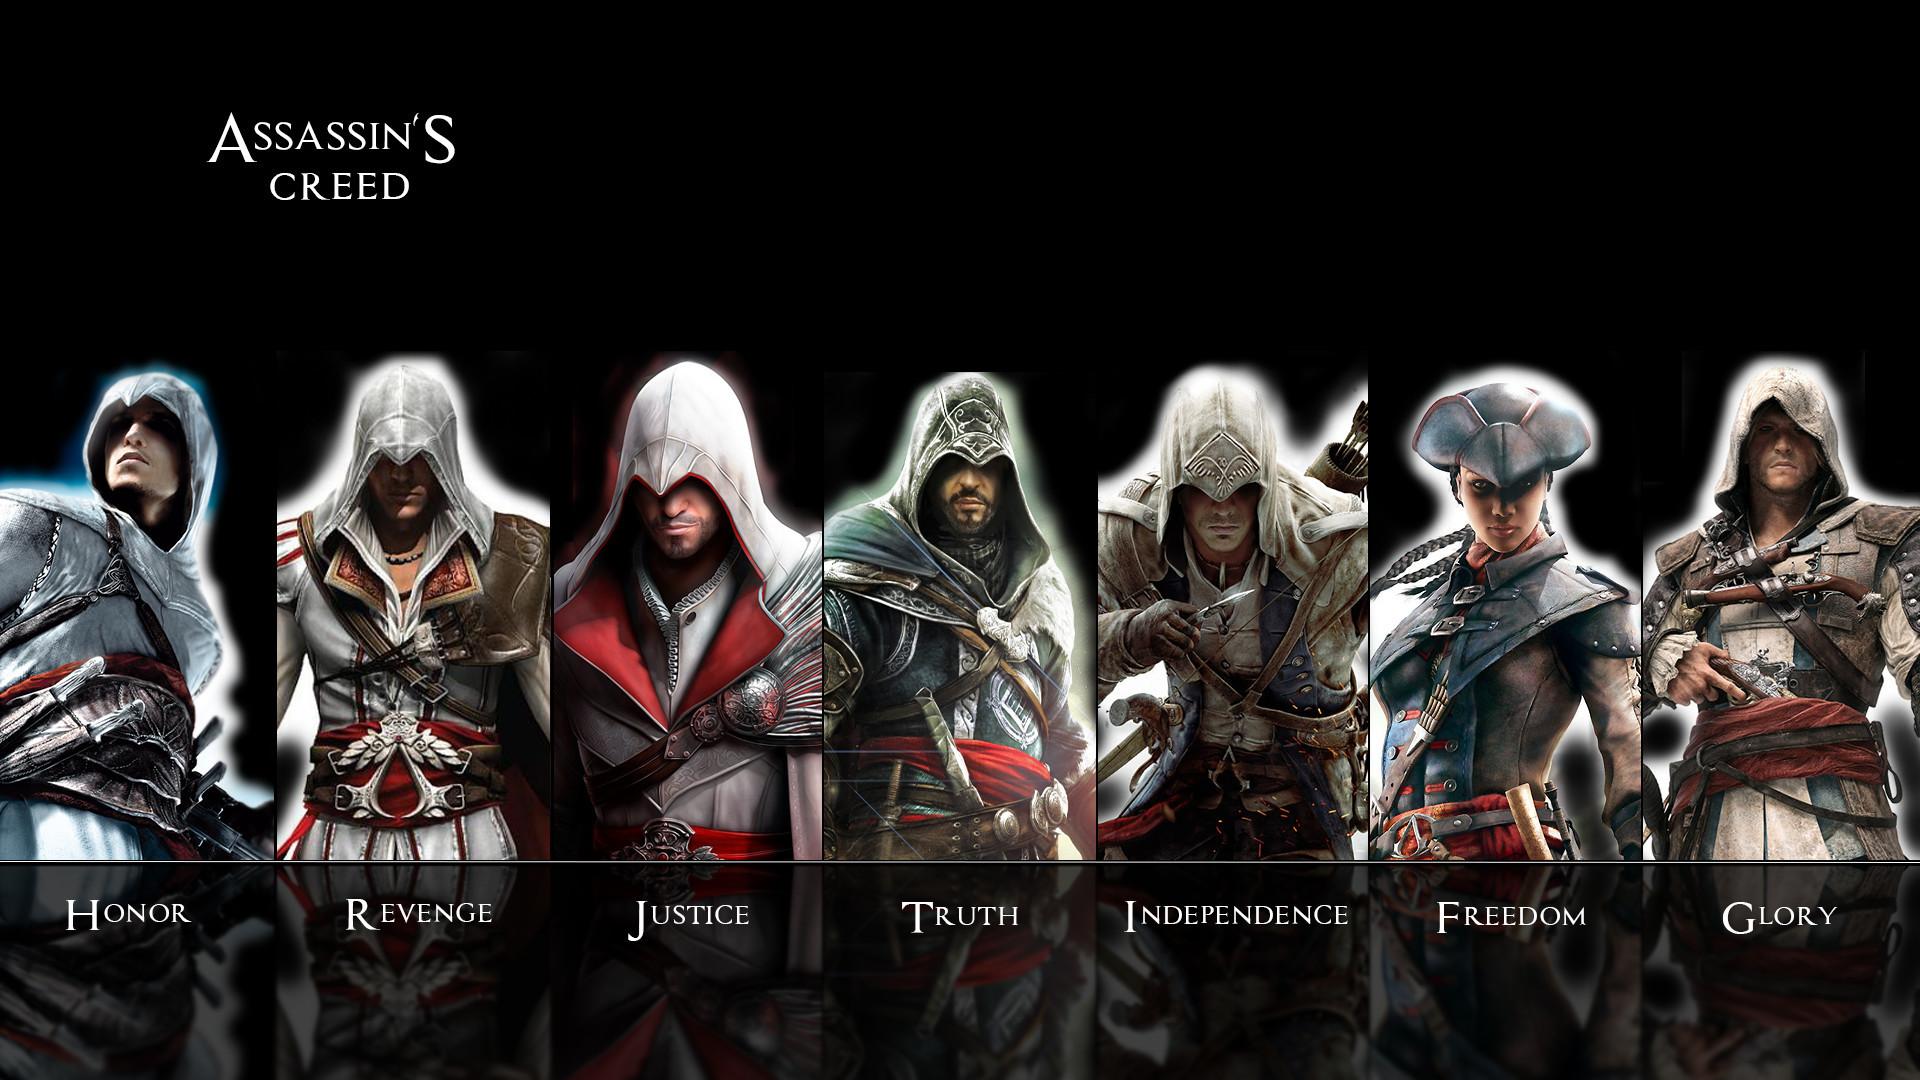 Assassins Creed HD Wallpaper background picture